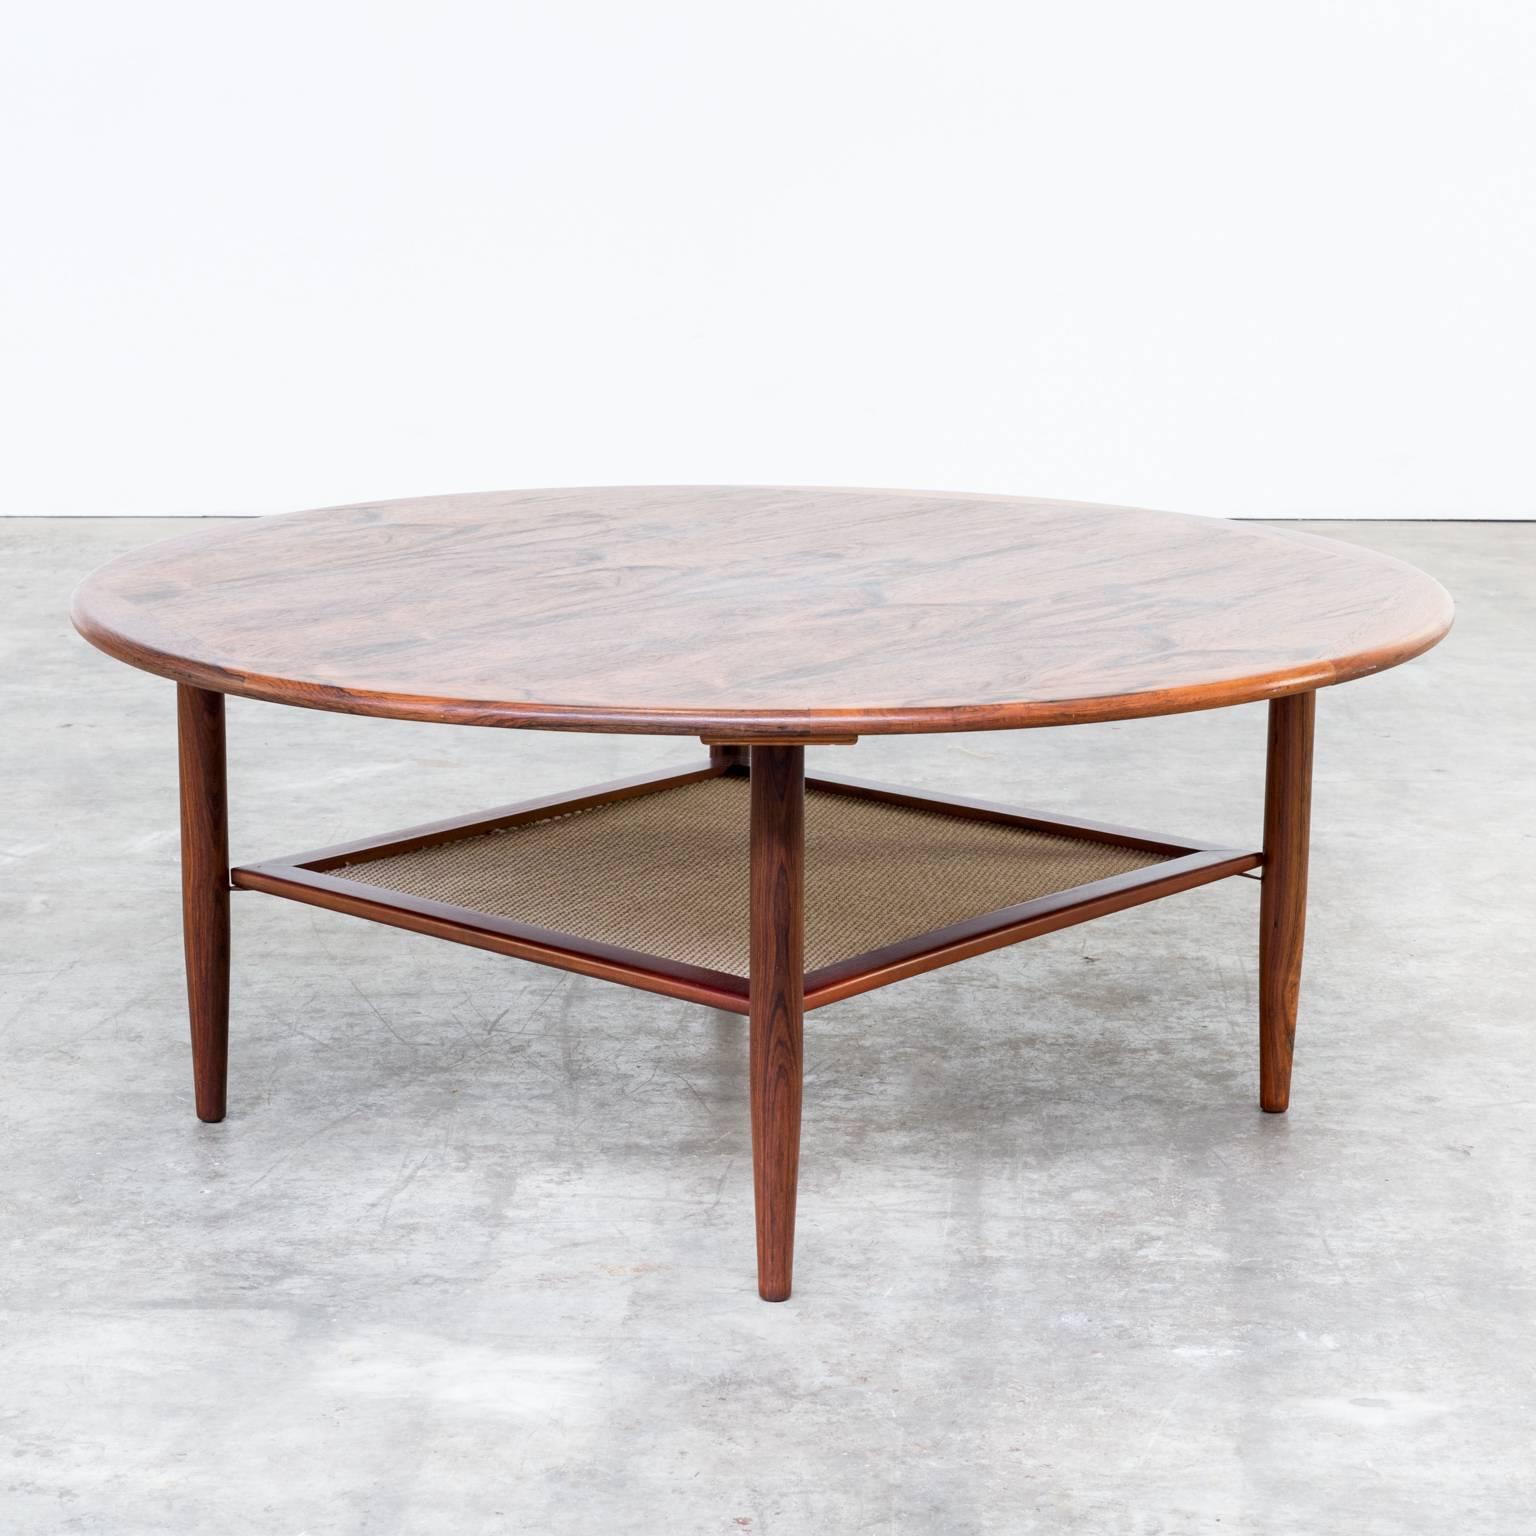 1970s rosewood round coffee table with caned insert attributed to Peter Hvidt for France & Son. Beautiful condition, wear consistent with age and use. Strong caned under top. Dimensions: Ø 101.5cm x 41cm H.
 